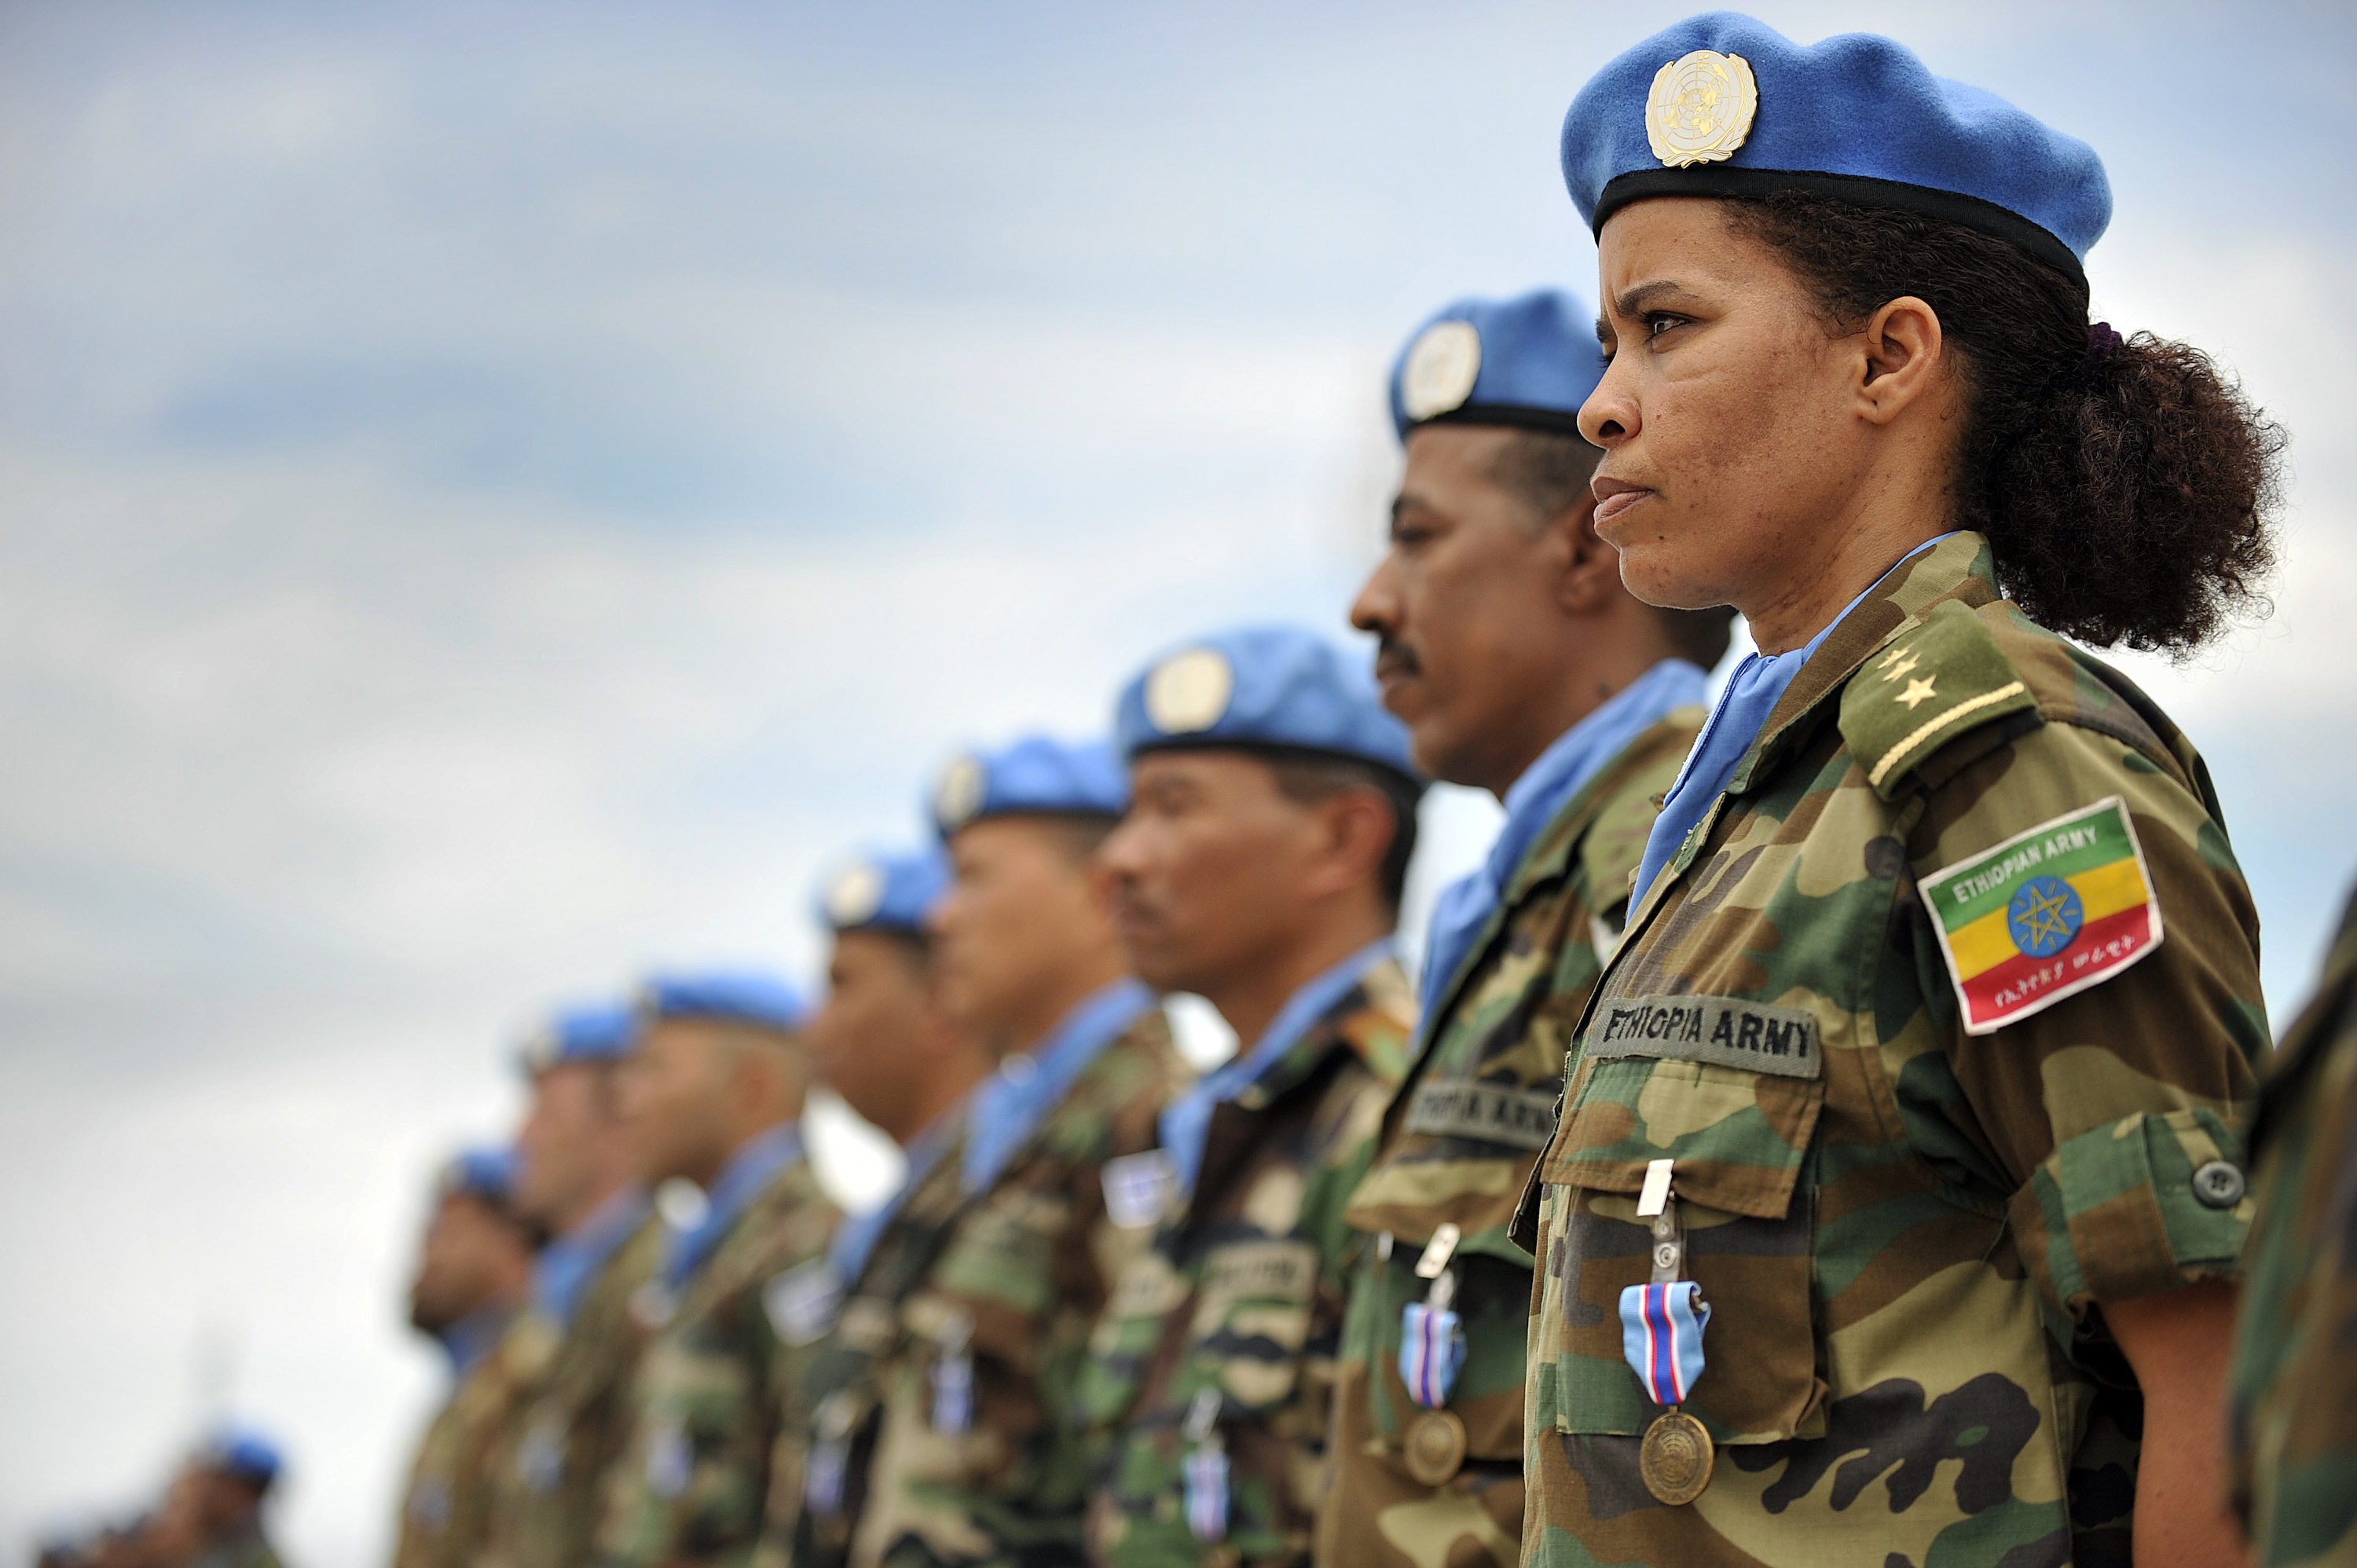 Female Ethiopean Peacekeeper in the foreground during a medal parade for Milops in Monrovia, Liberia